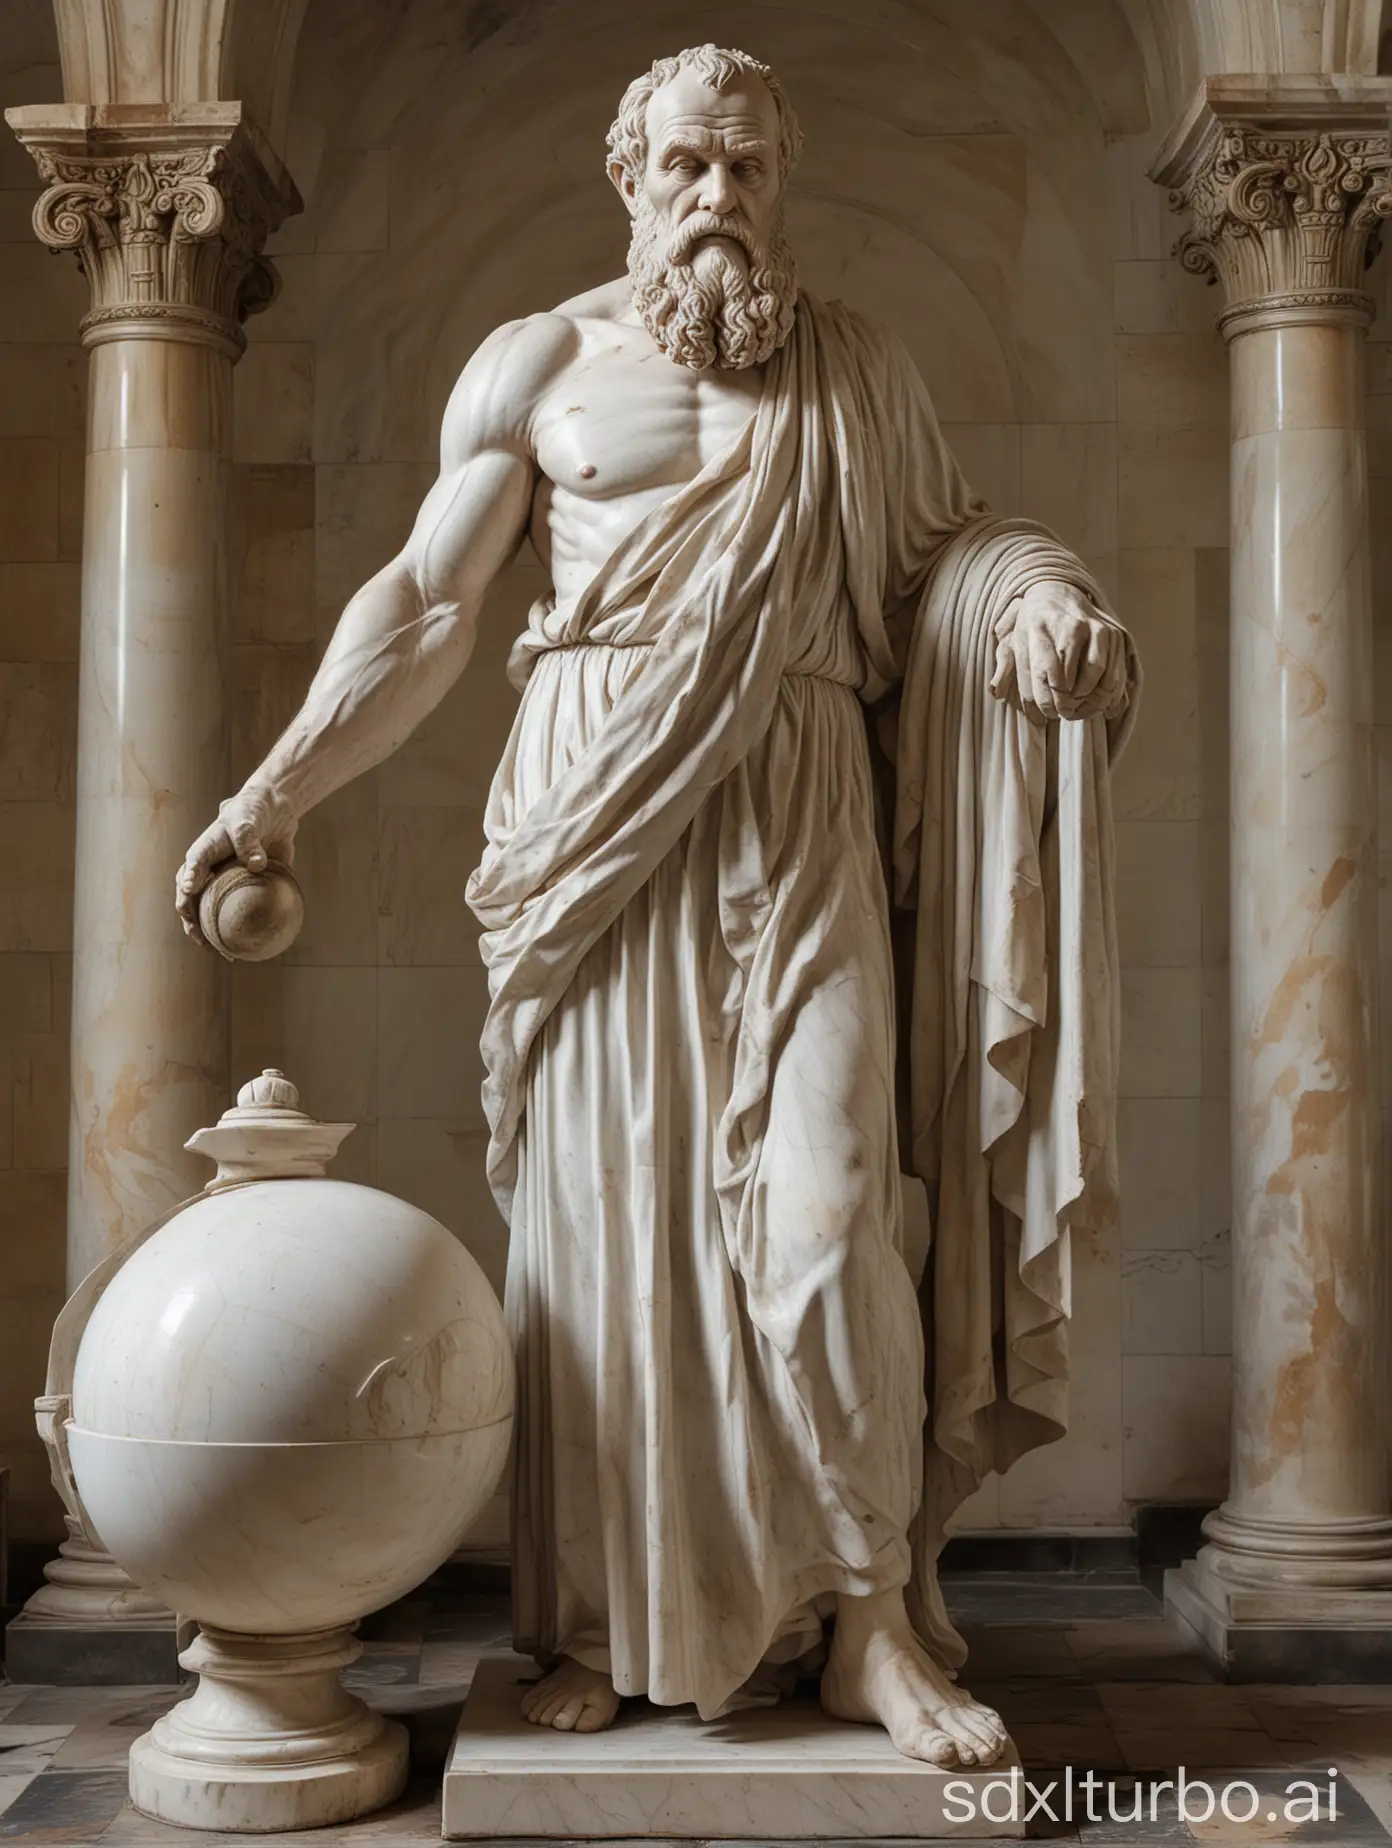 Marble-Statue-of-Bearded-Old-Man-Holding-Sphere-in-Chapel